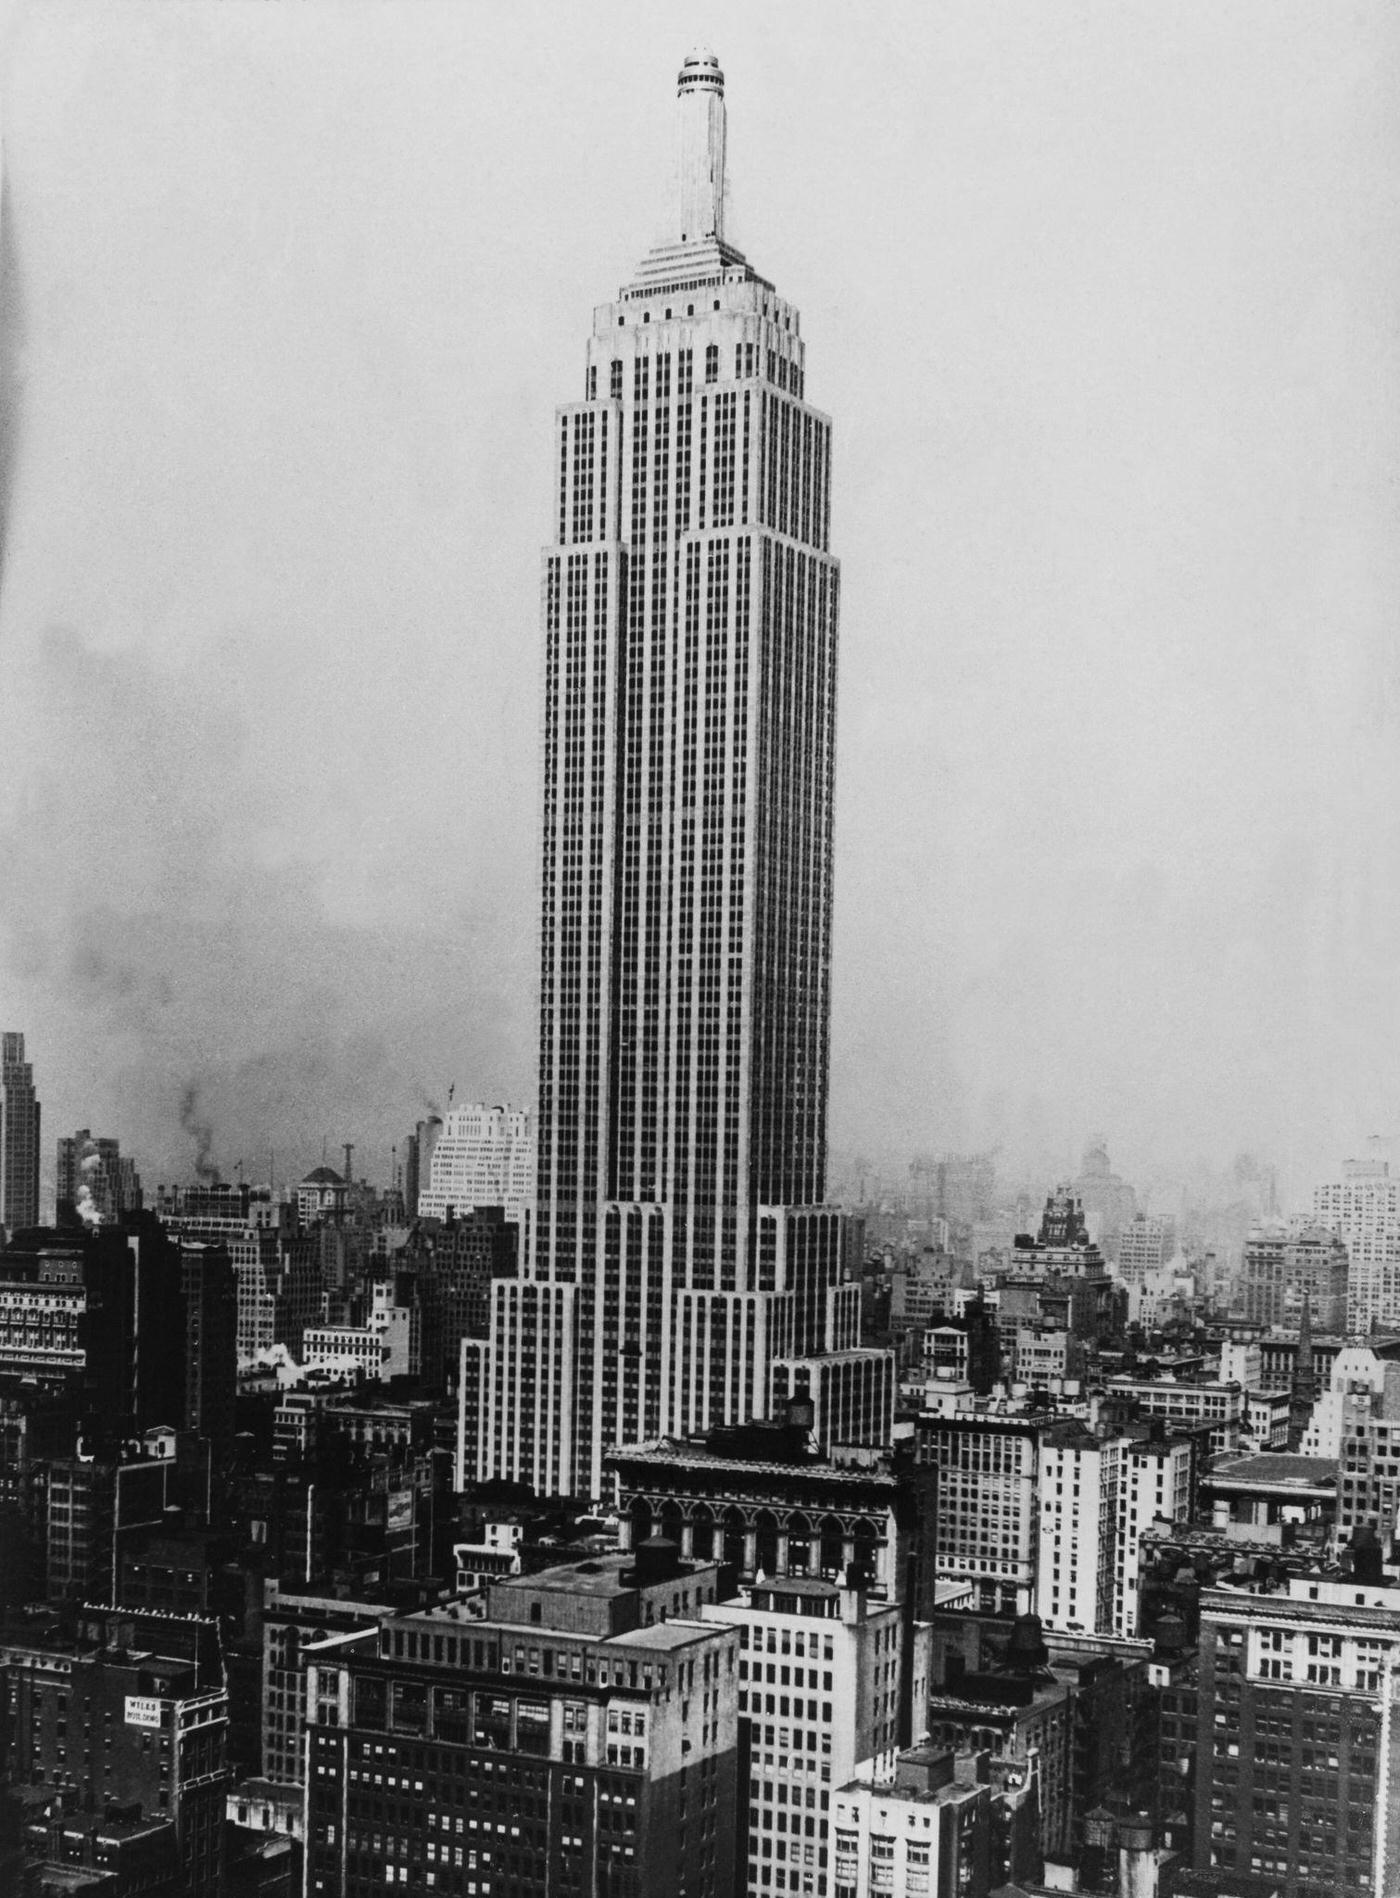 Empire State Building at Manhattan in New York on July 1945